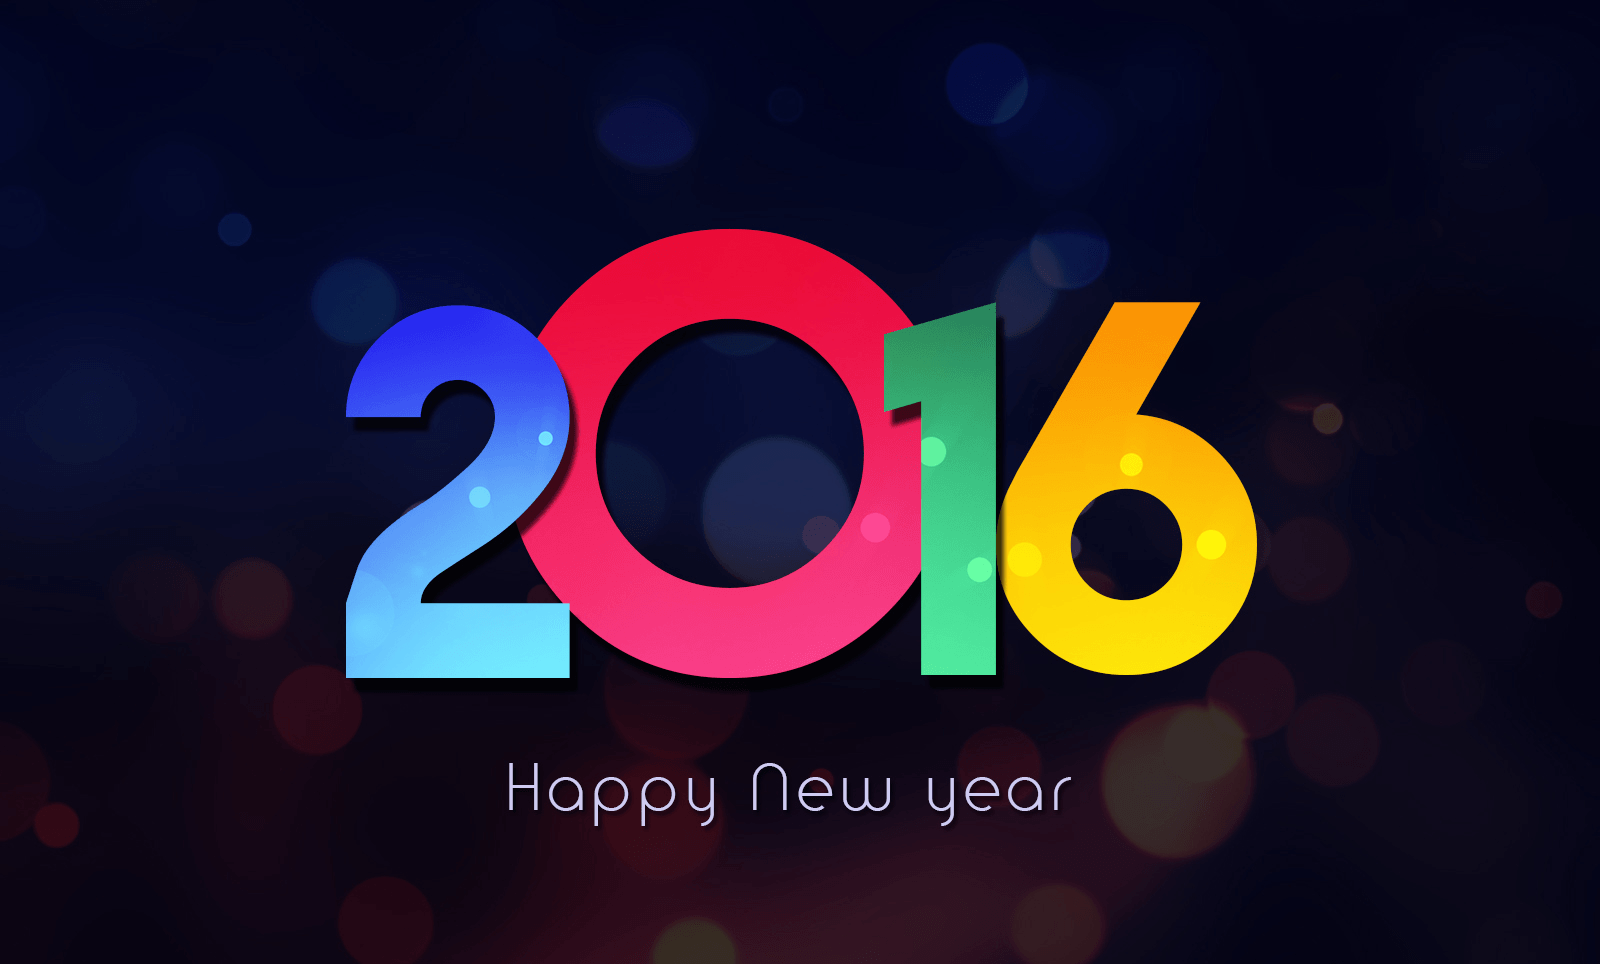 Happy New Year 2016 Wallpaper in HD Mothers Day 2016 SMS